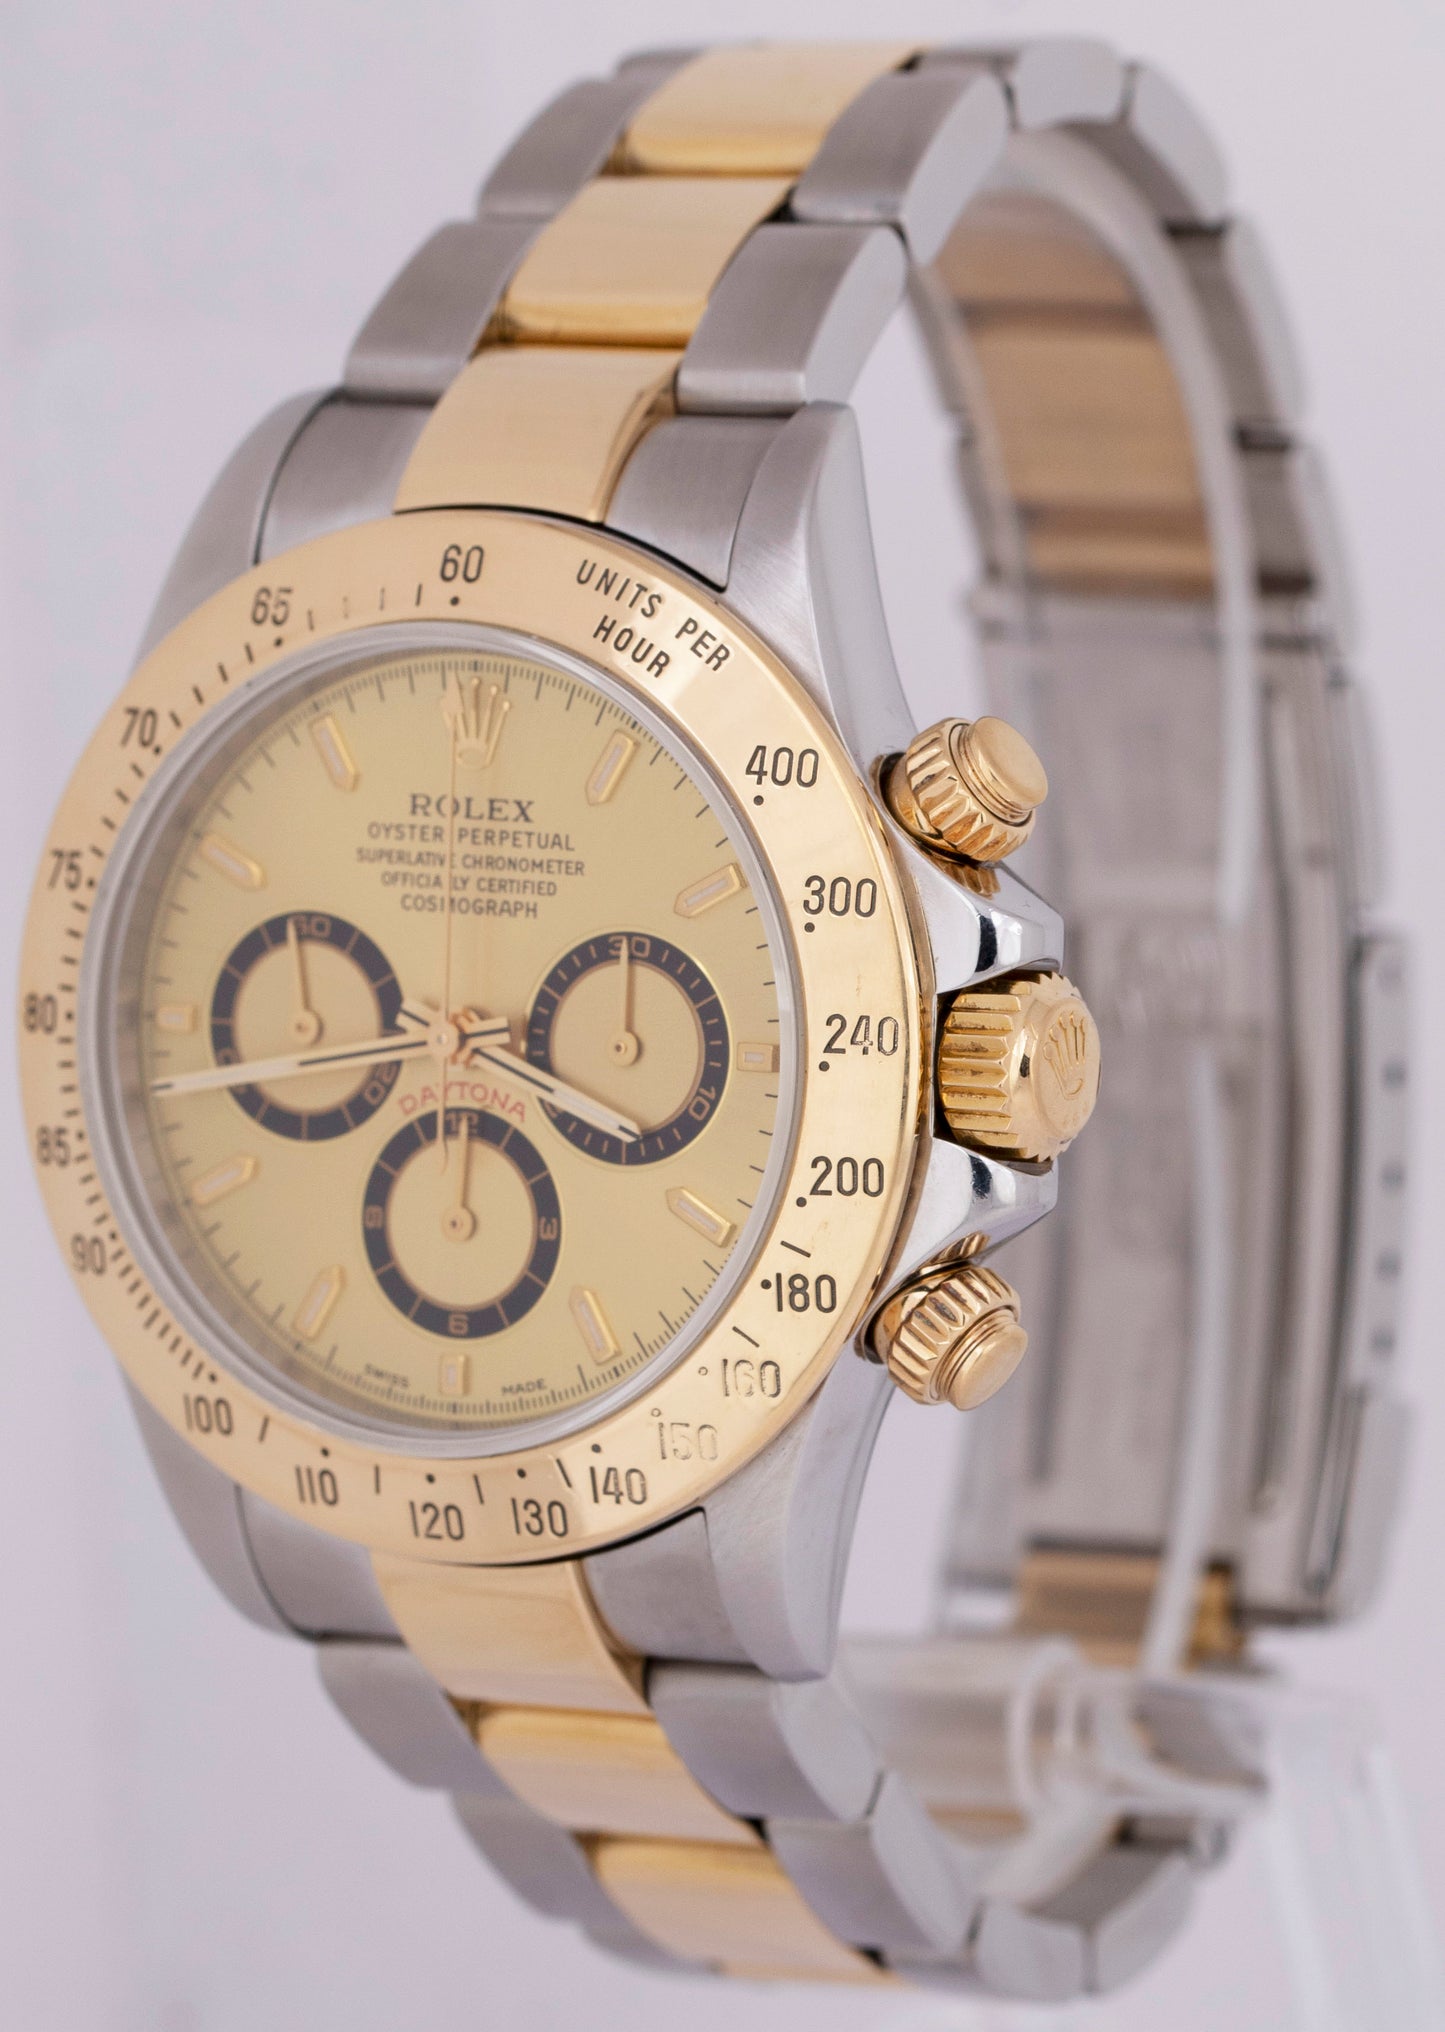 2001 Rolex Daytona 40mm P-Serial Champagne Two-Tone SEL Gold Steel Watch 16523